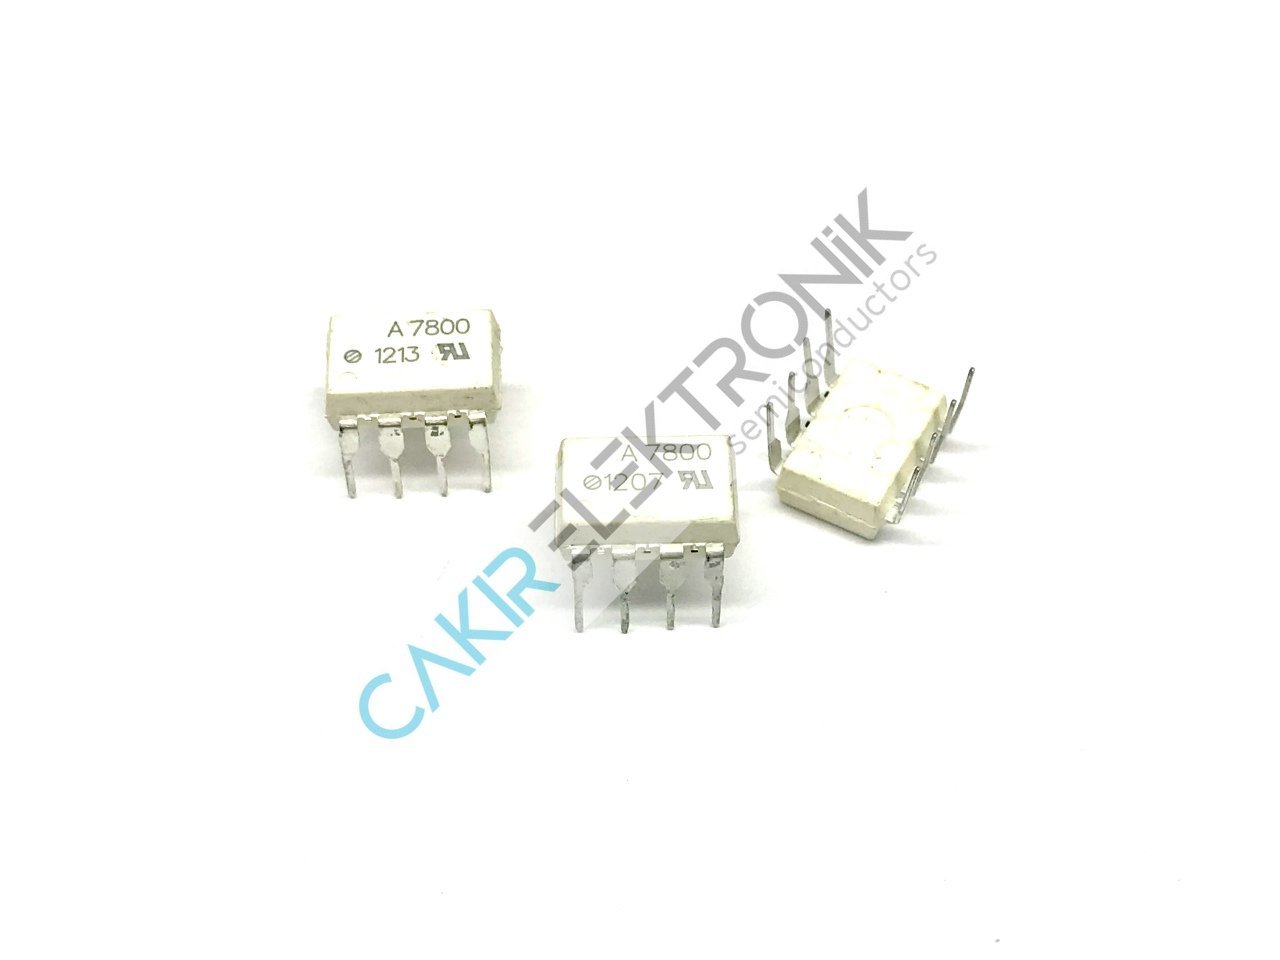 HCPL7800 - A7800 - HCPL-7800-000E Isolation Amplifer OPTOCOUPLER